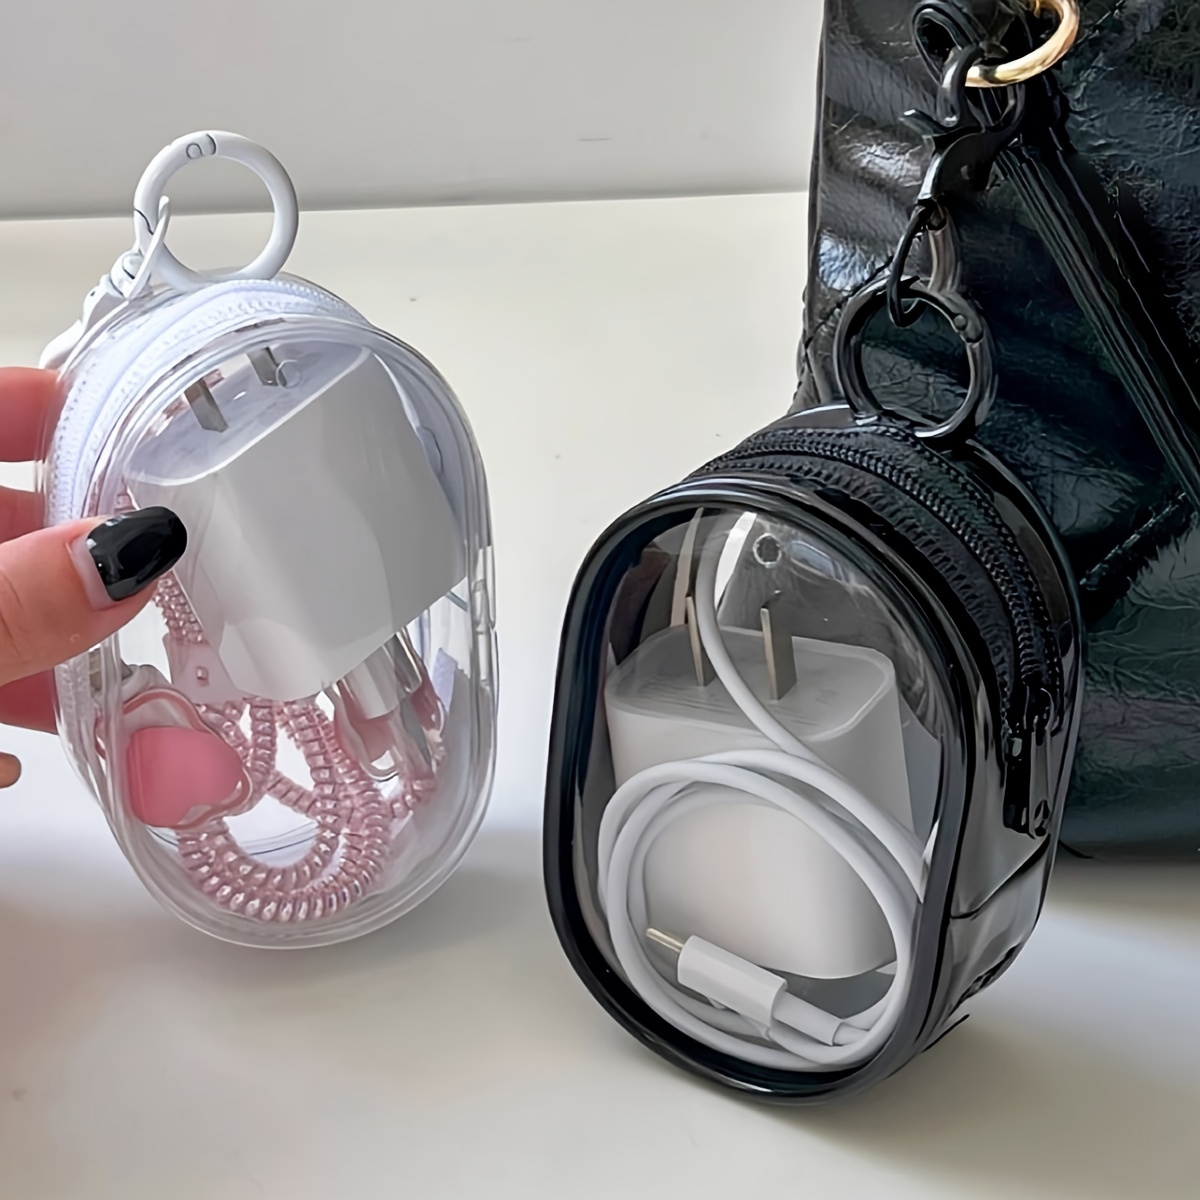 

1pc Transparent Cable Organizer Box For Storing Data Cable Charger, Mini And Portable For Carrying Out Charger, Earphones, Etc.